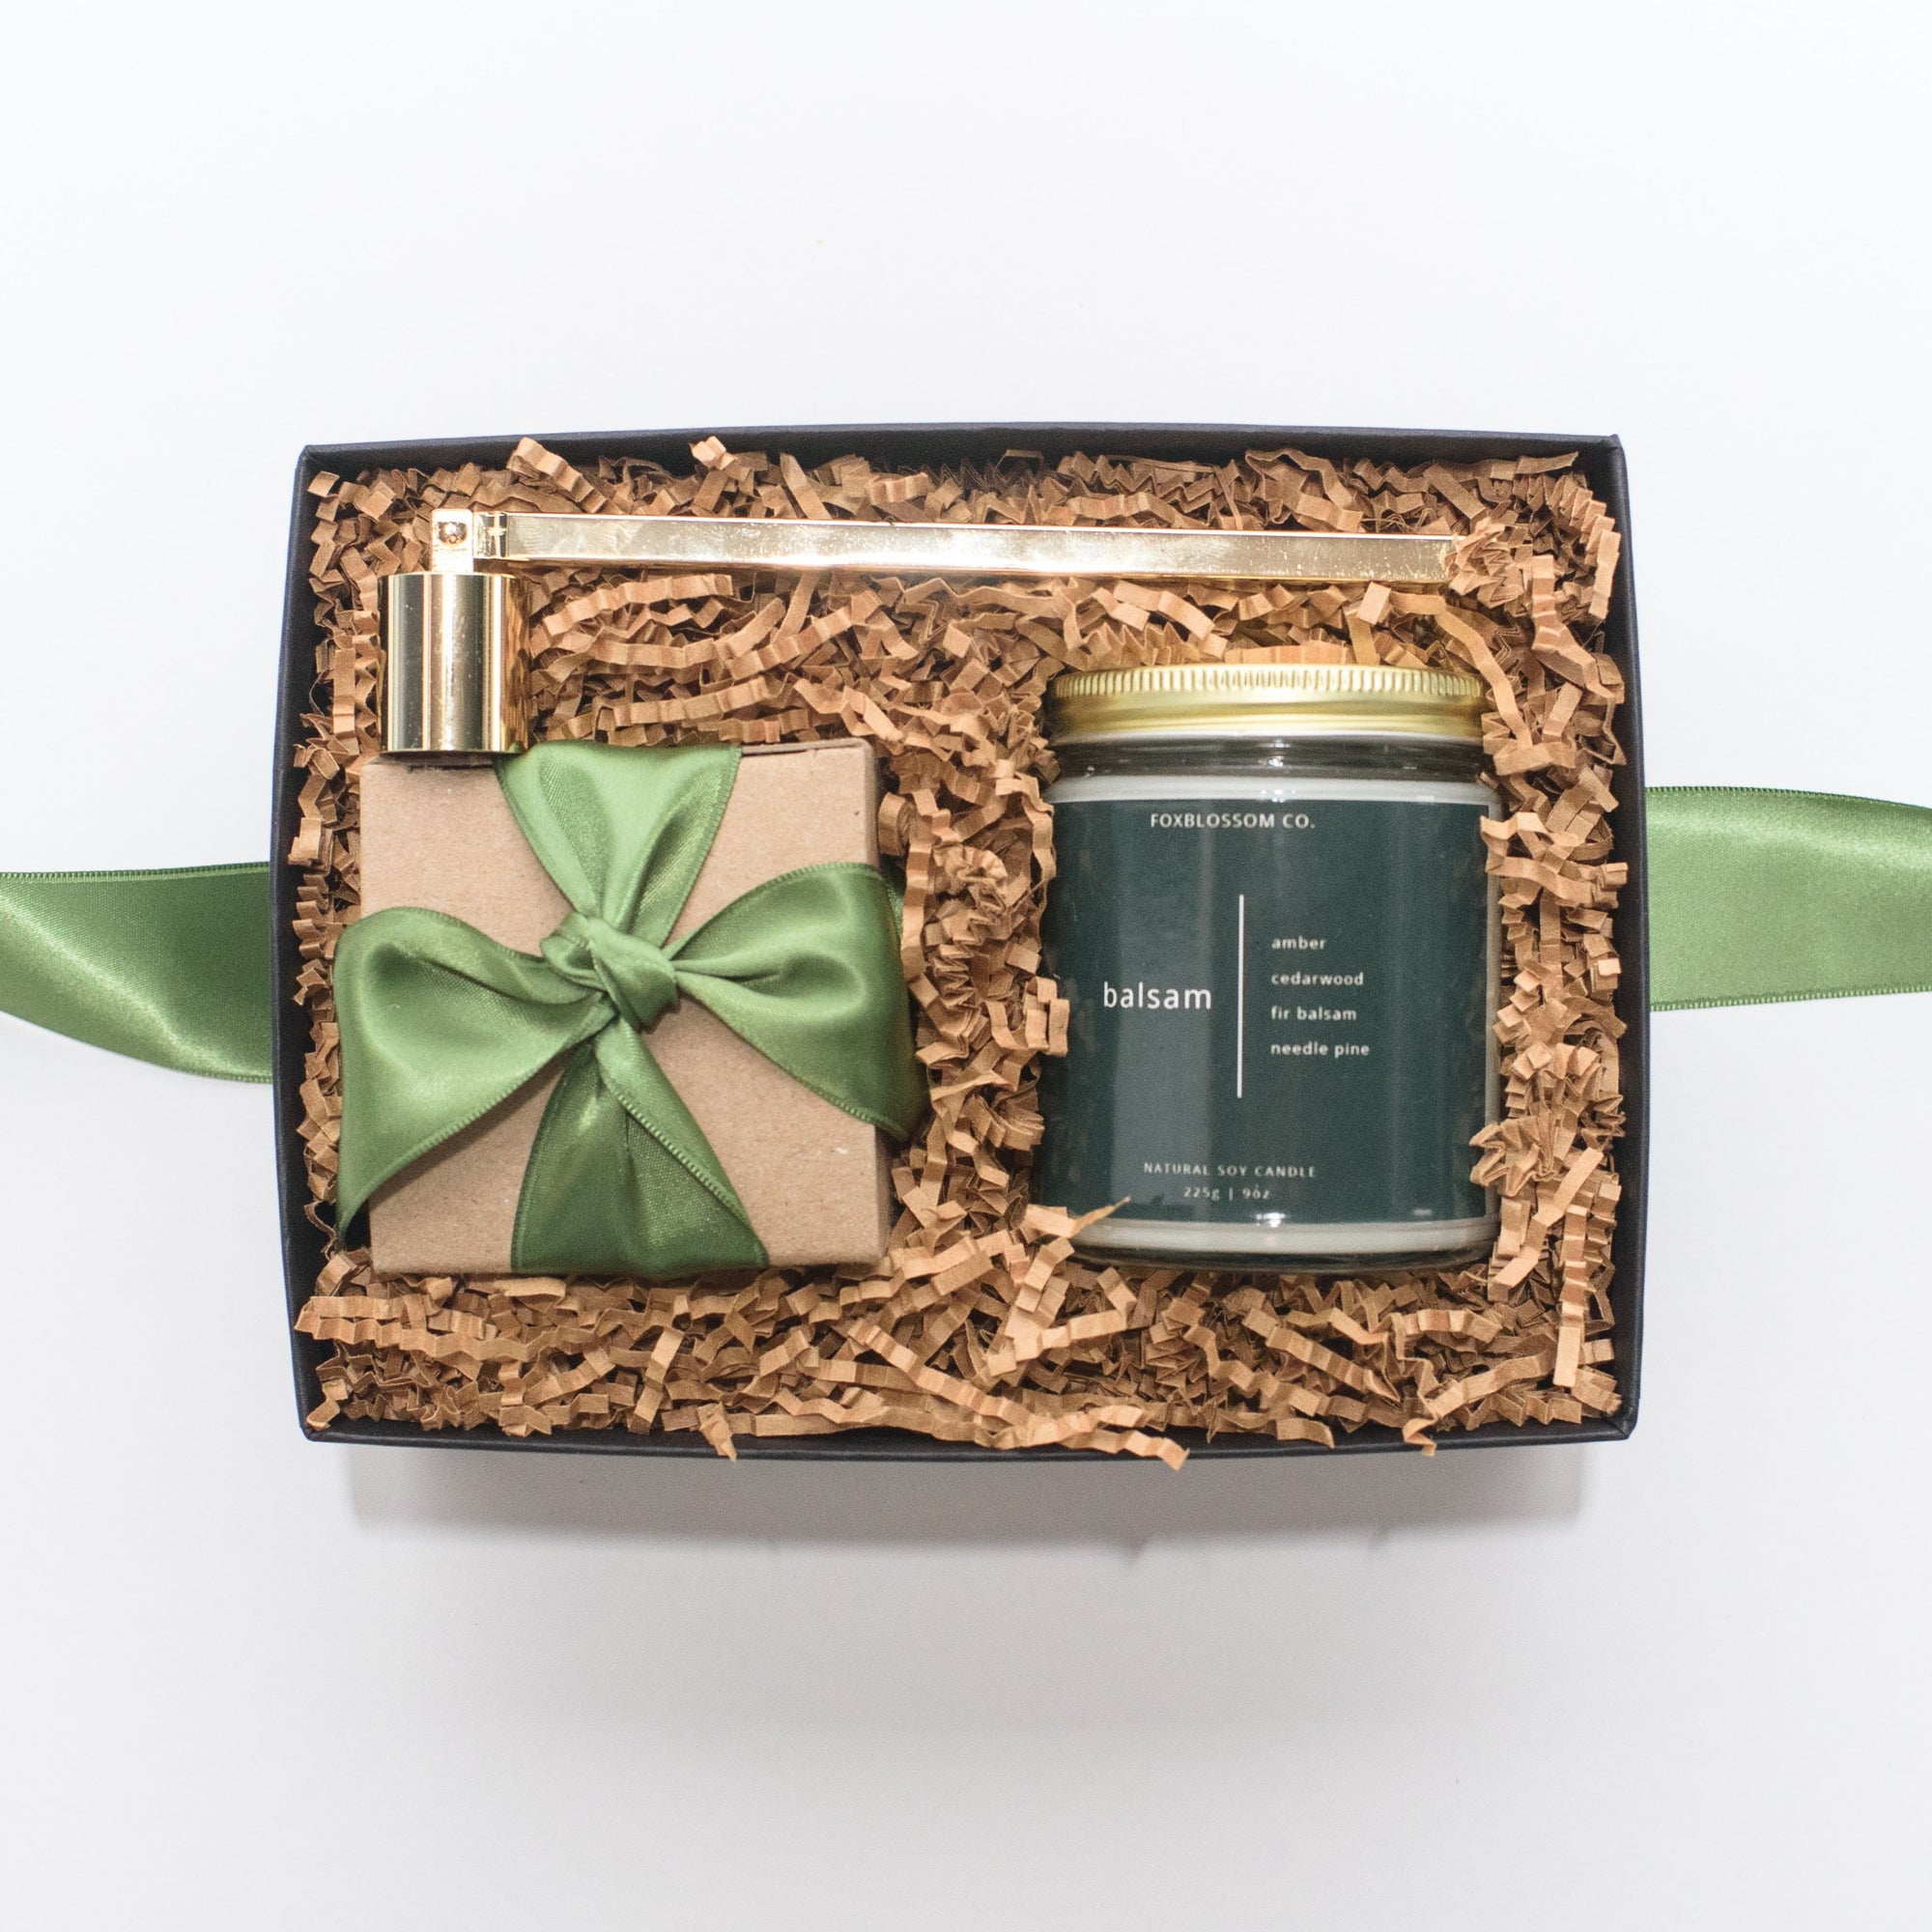 Curated Gift Boxes & Personalized Gifts - Foxblossom Co.